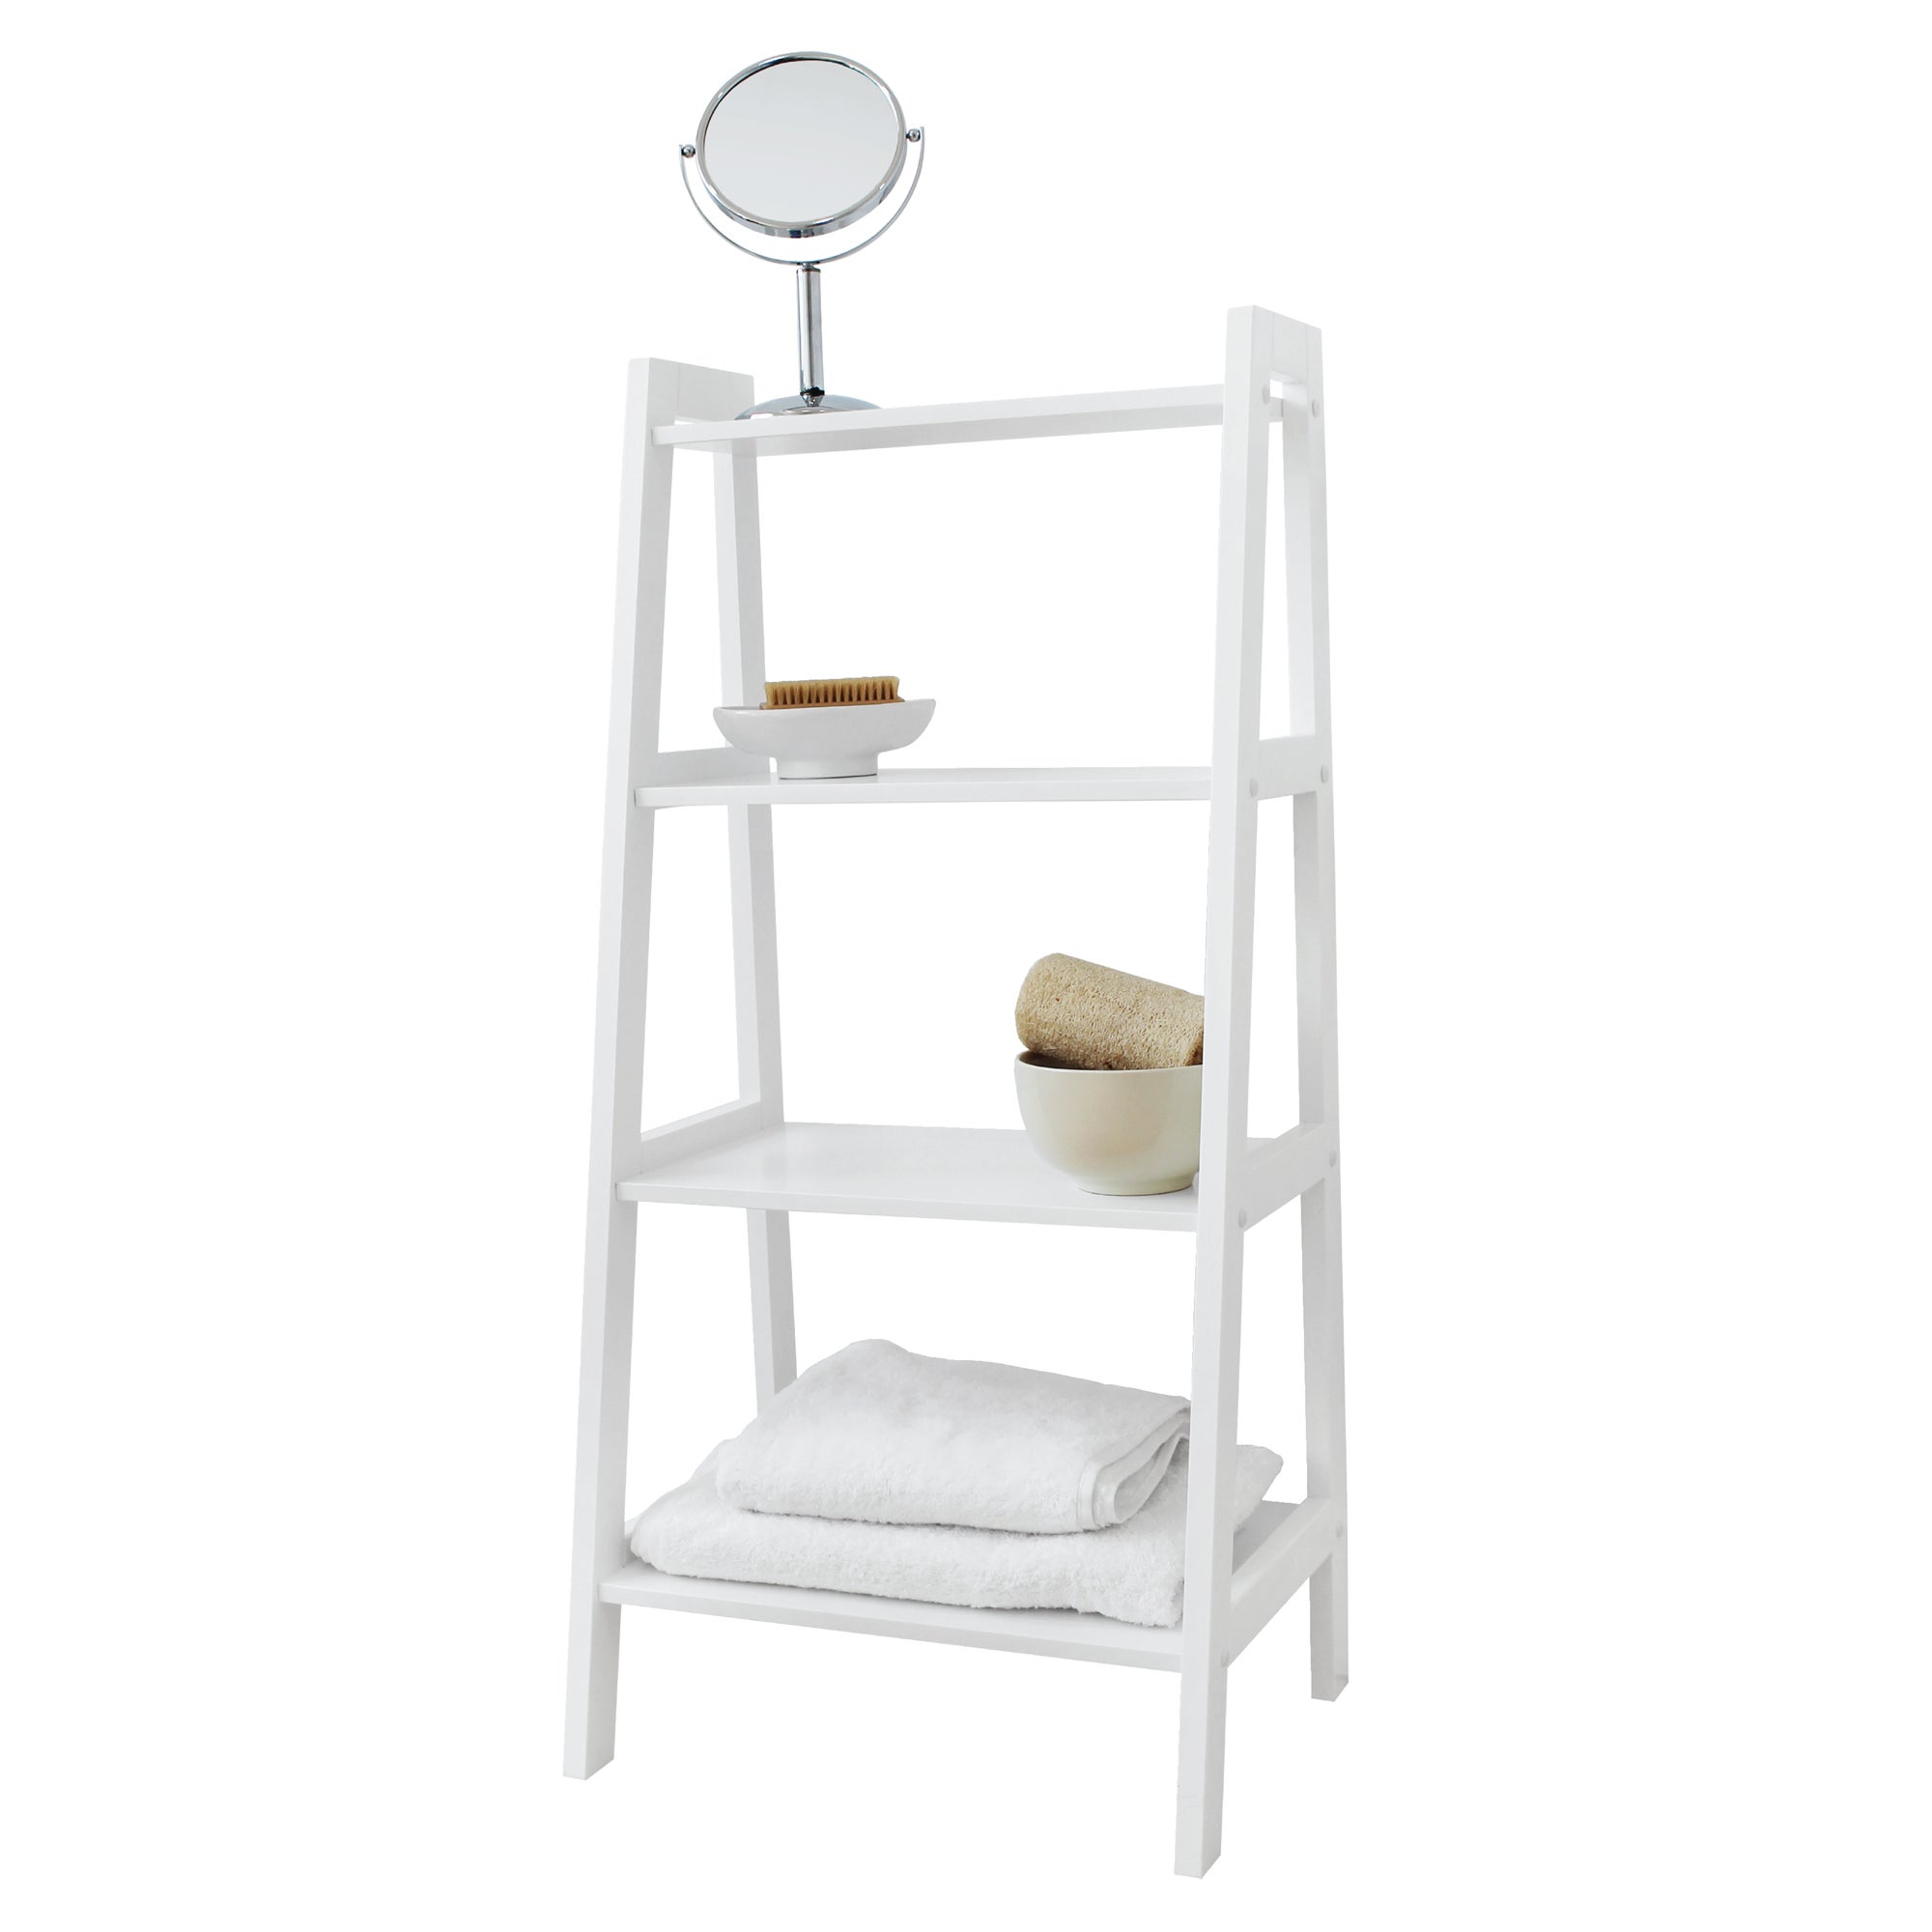 Photos - Other sanitary accessories White 4 Tier Ladder Shelving White